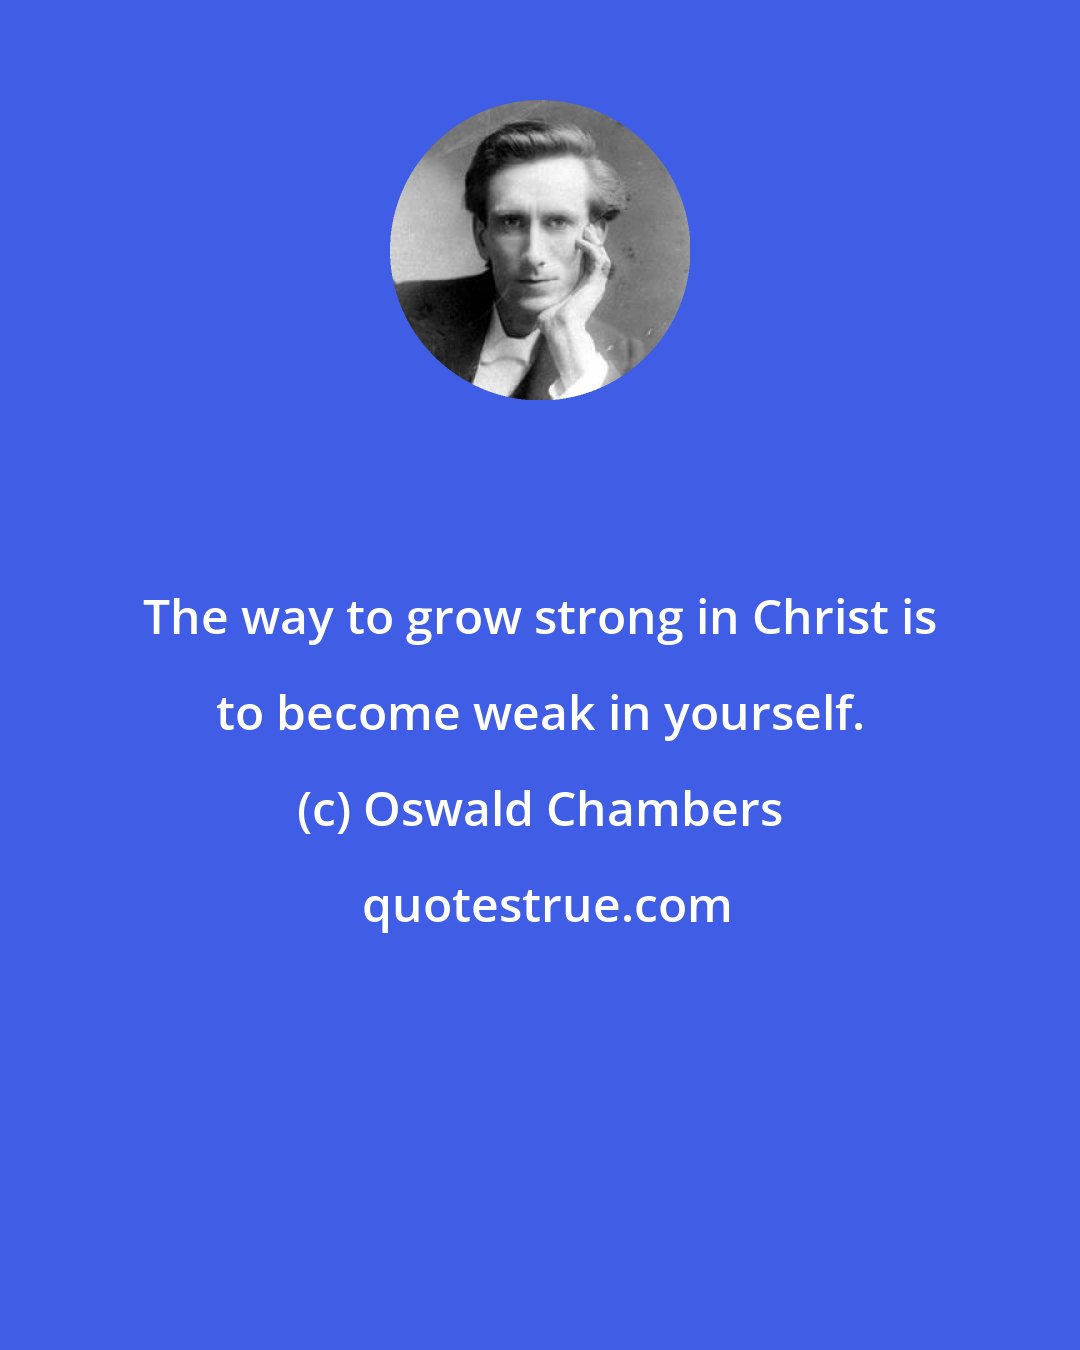 Oswald Chambers: The way to grow strong in Christ is to become weak in yourself.